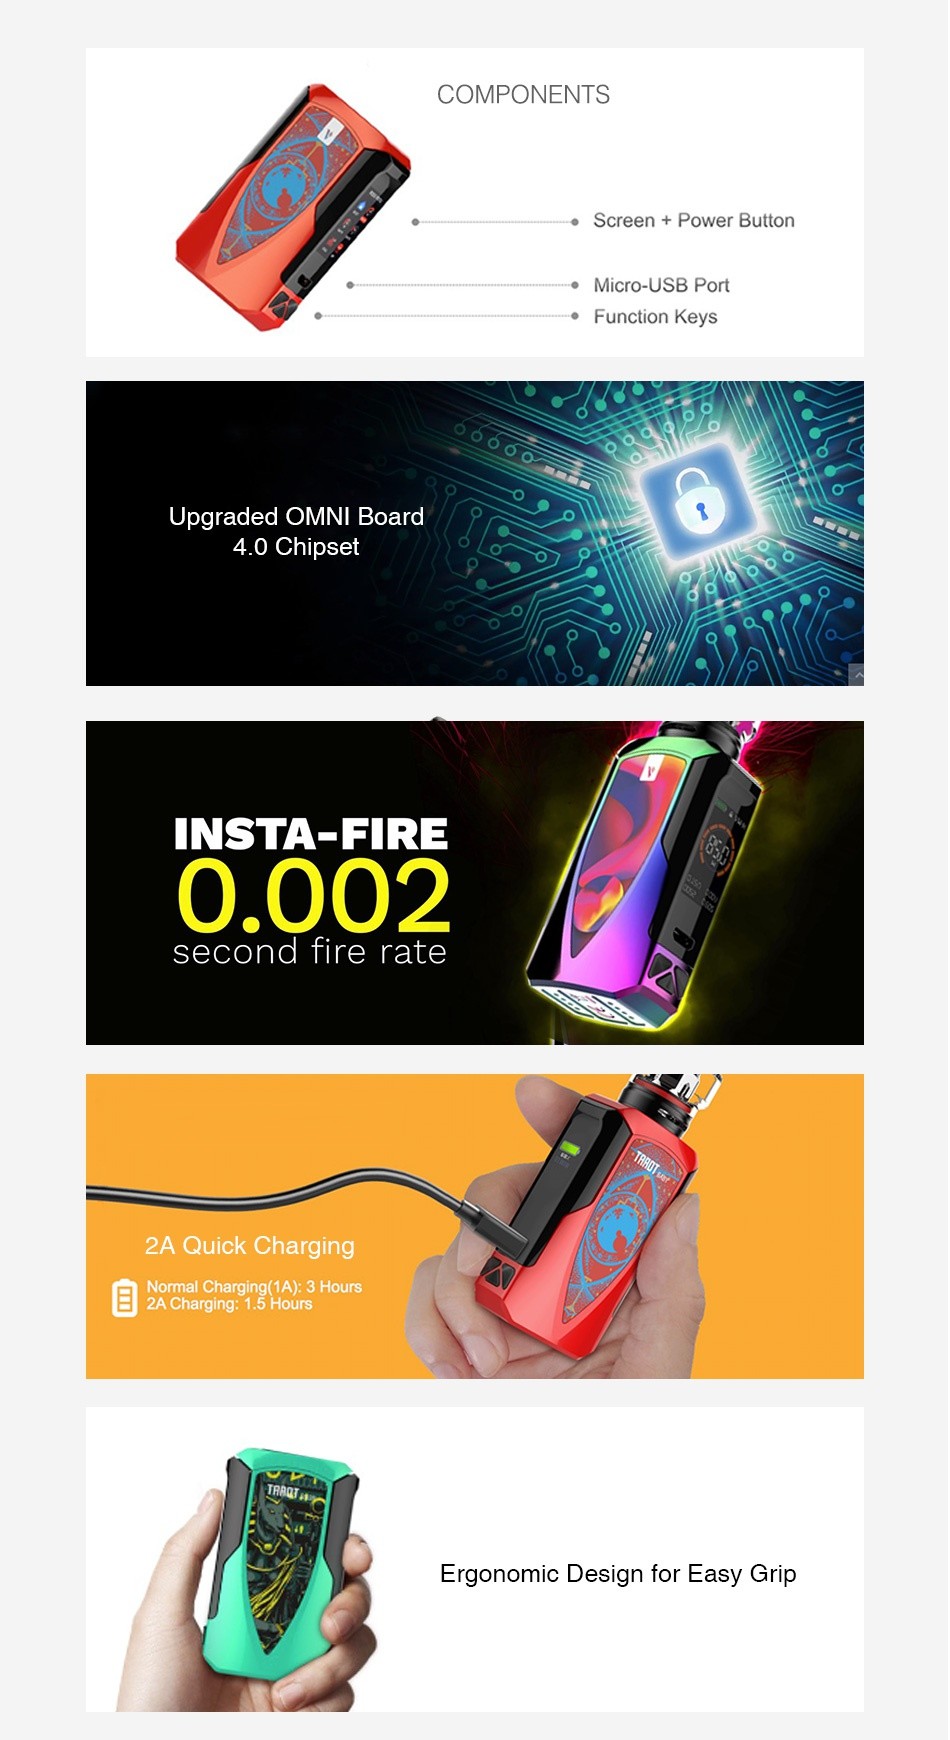 Vaporesso Tarot Baby 85W TC MOD 2500mAh COMPONENTS Screen Power Button   Micro  USB Port Function Keys Upgraded OMNI Board 4 0 Chipset 0 6 FR  0 econd fi 2A Quick Charging   formal Charging 1A   3 Hours 2A Charging  1 5 Hours Ergonomic Design for Easy Grip